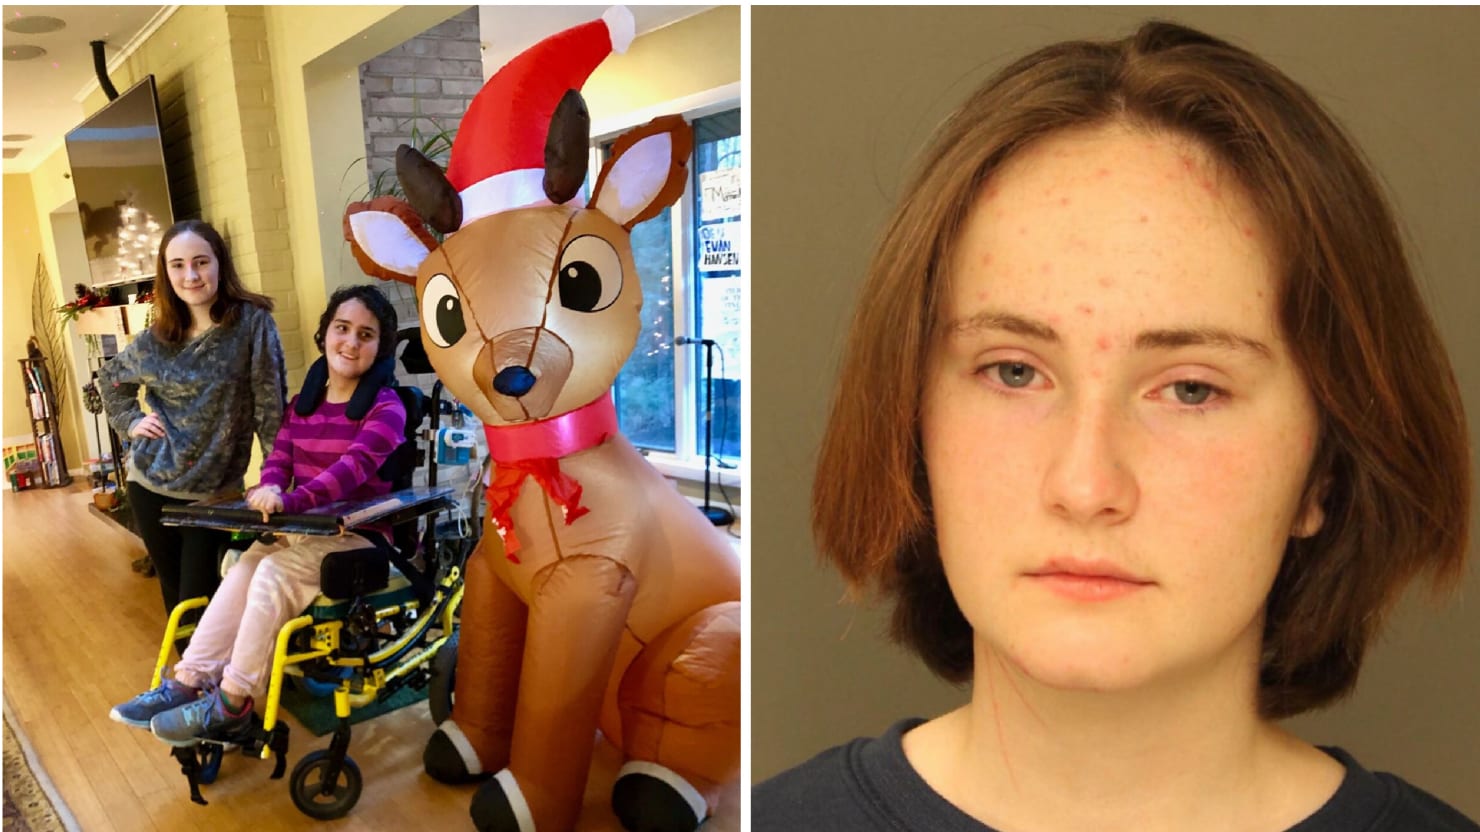 Claire Miller Accused of Murdering Her Disabled Older Sister, Helen